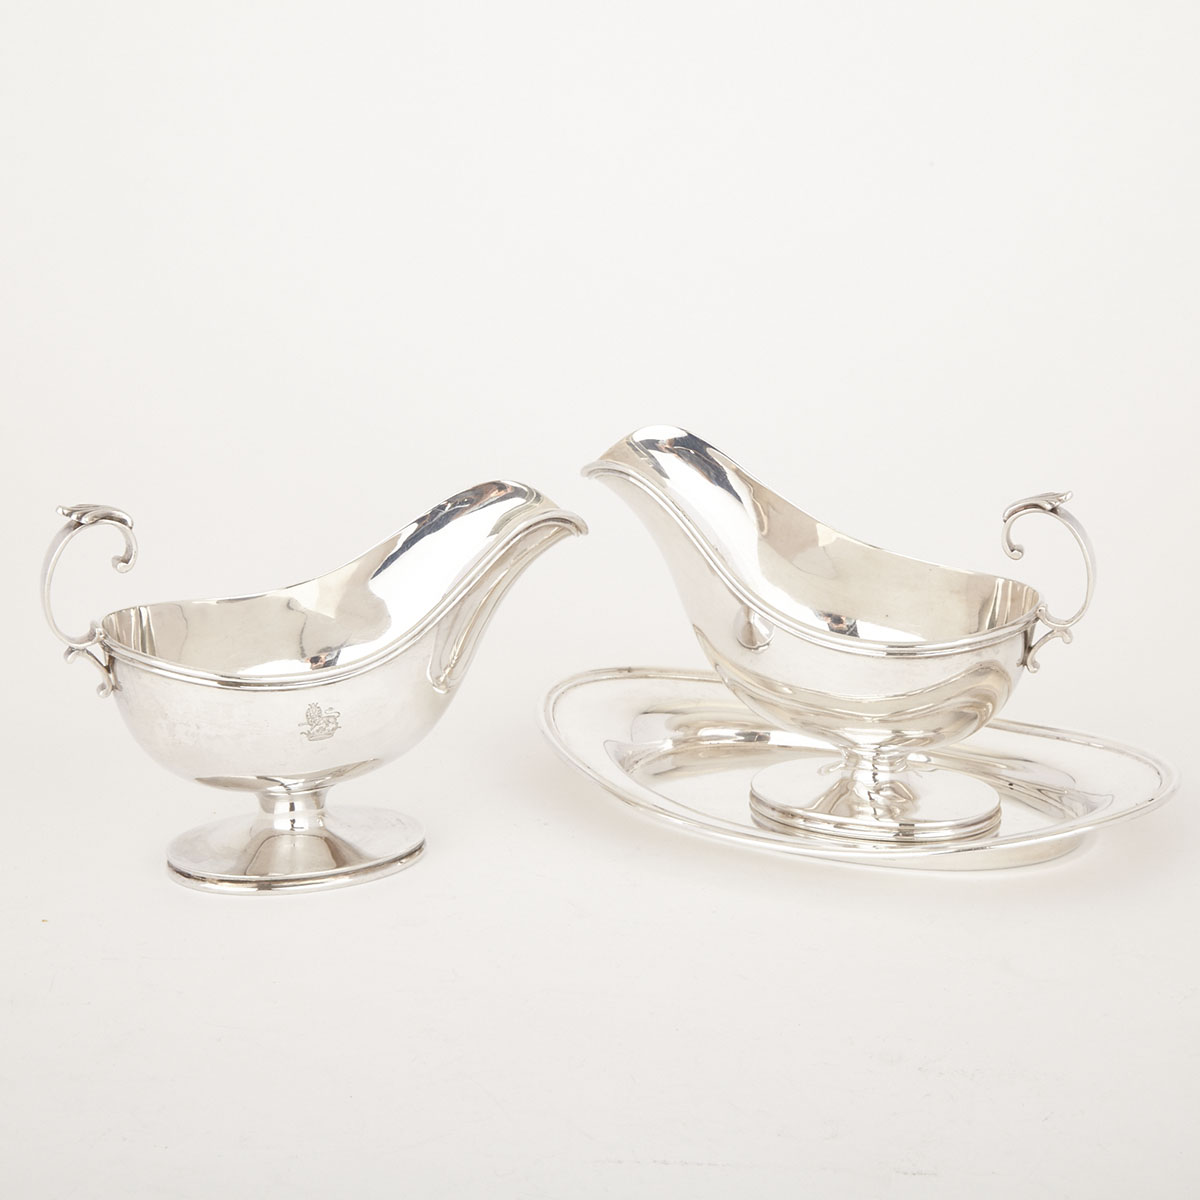 Pair of Canadian Silver Sauce Boats and Matching Oval Dish, Henry Birks & Sons, Montreal, Que., early 20th century